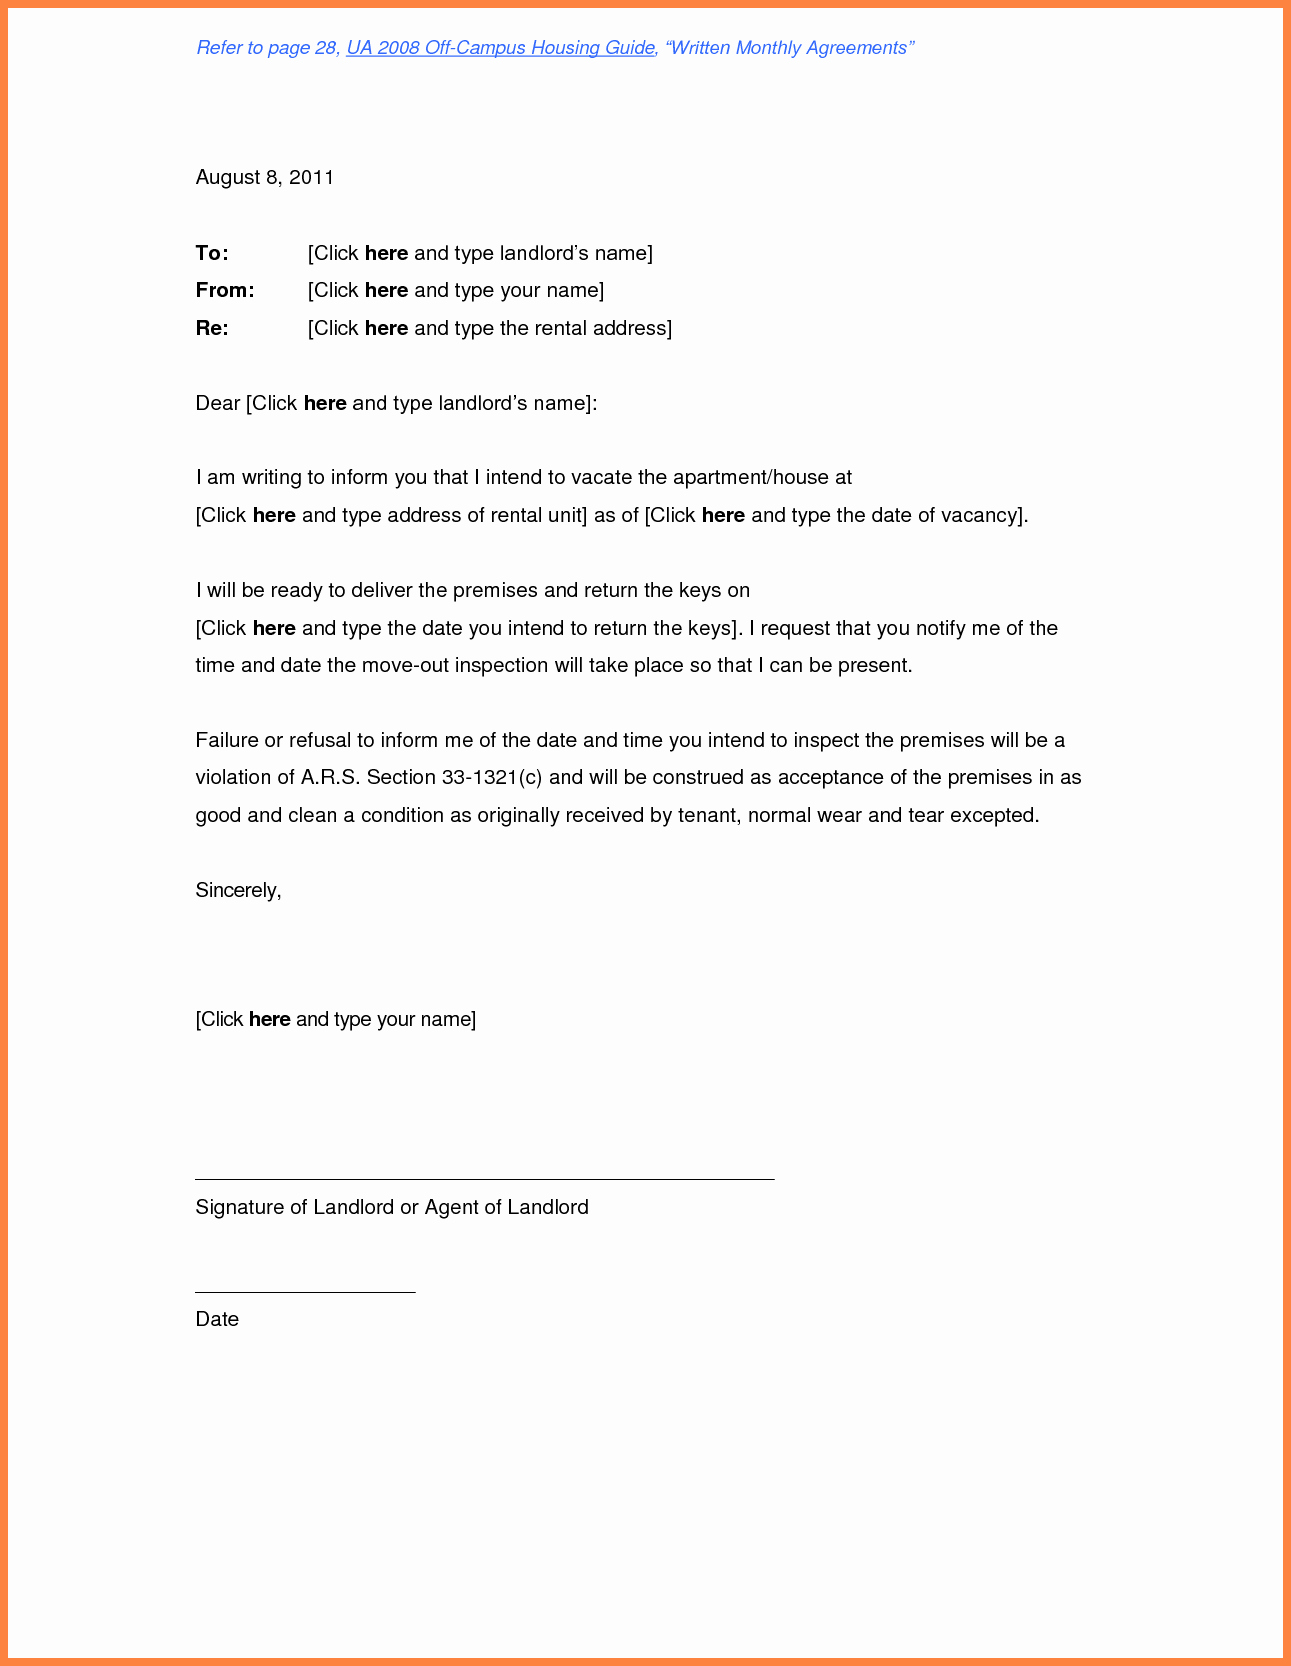 Lease Termination Agreement Template Free Unique 6 Termination Of Lease Agreement by Landlord